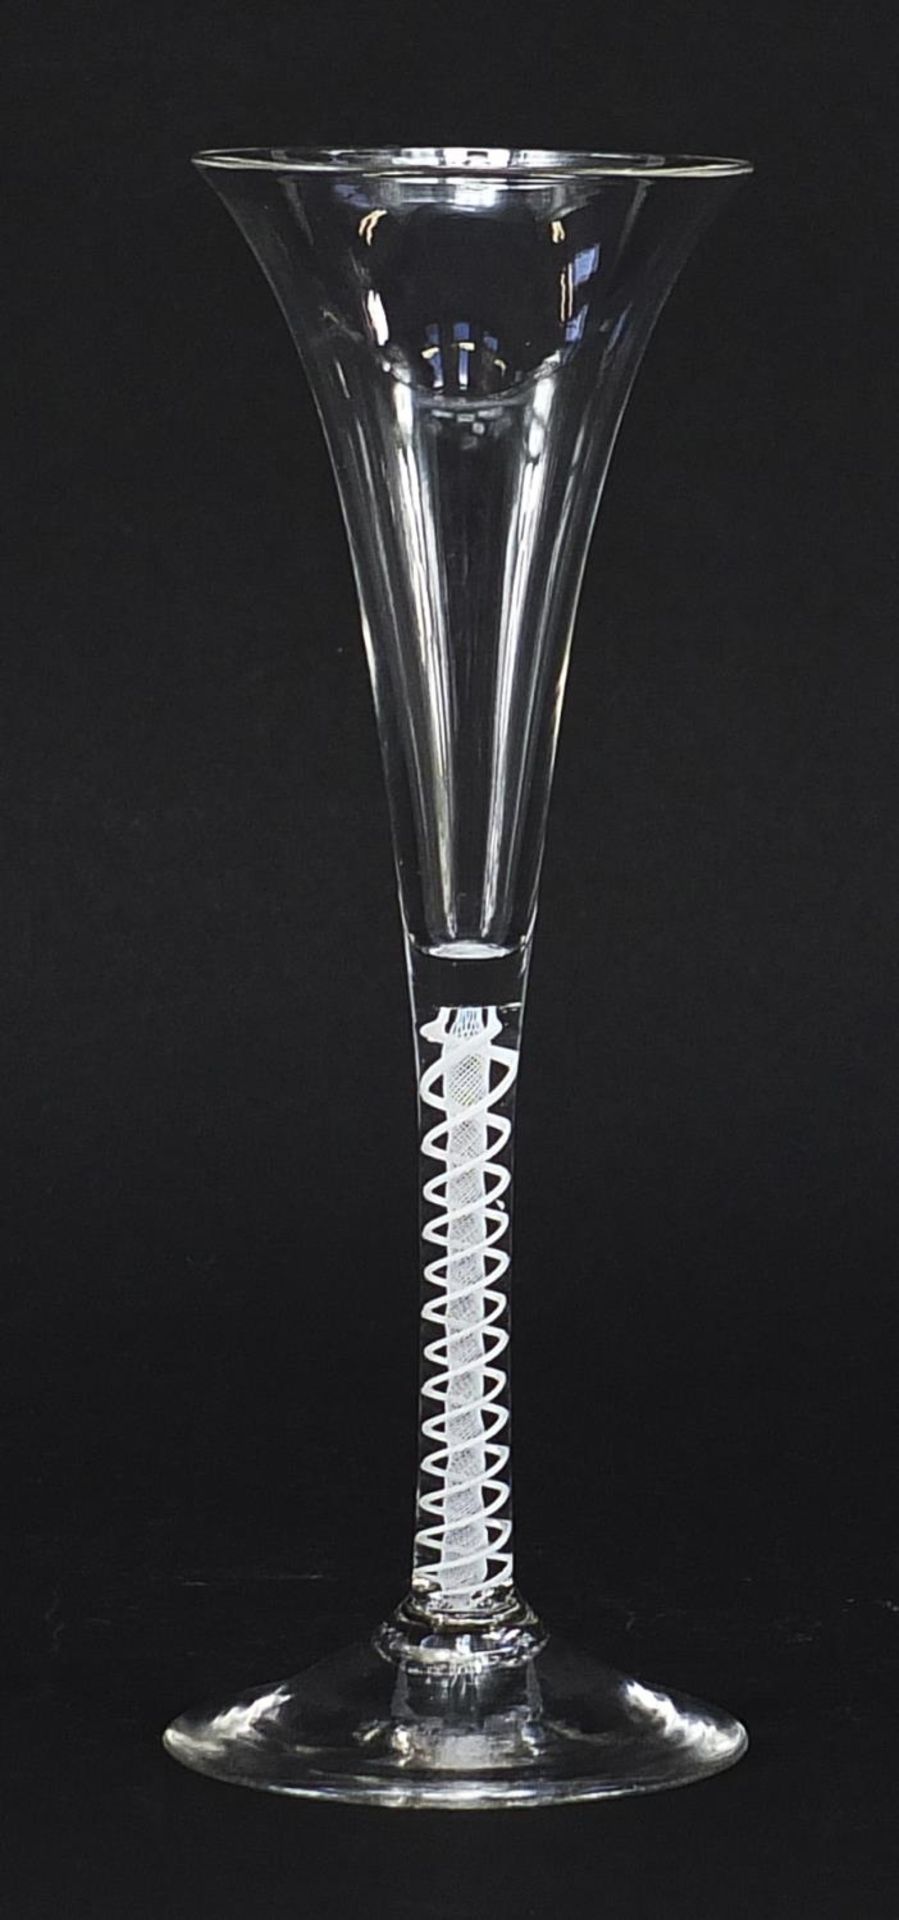 18th century wine glass with multiple opaque twist stem, 19.5cm high - Image 2 of 3